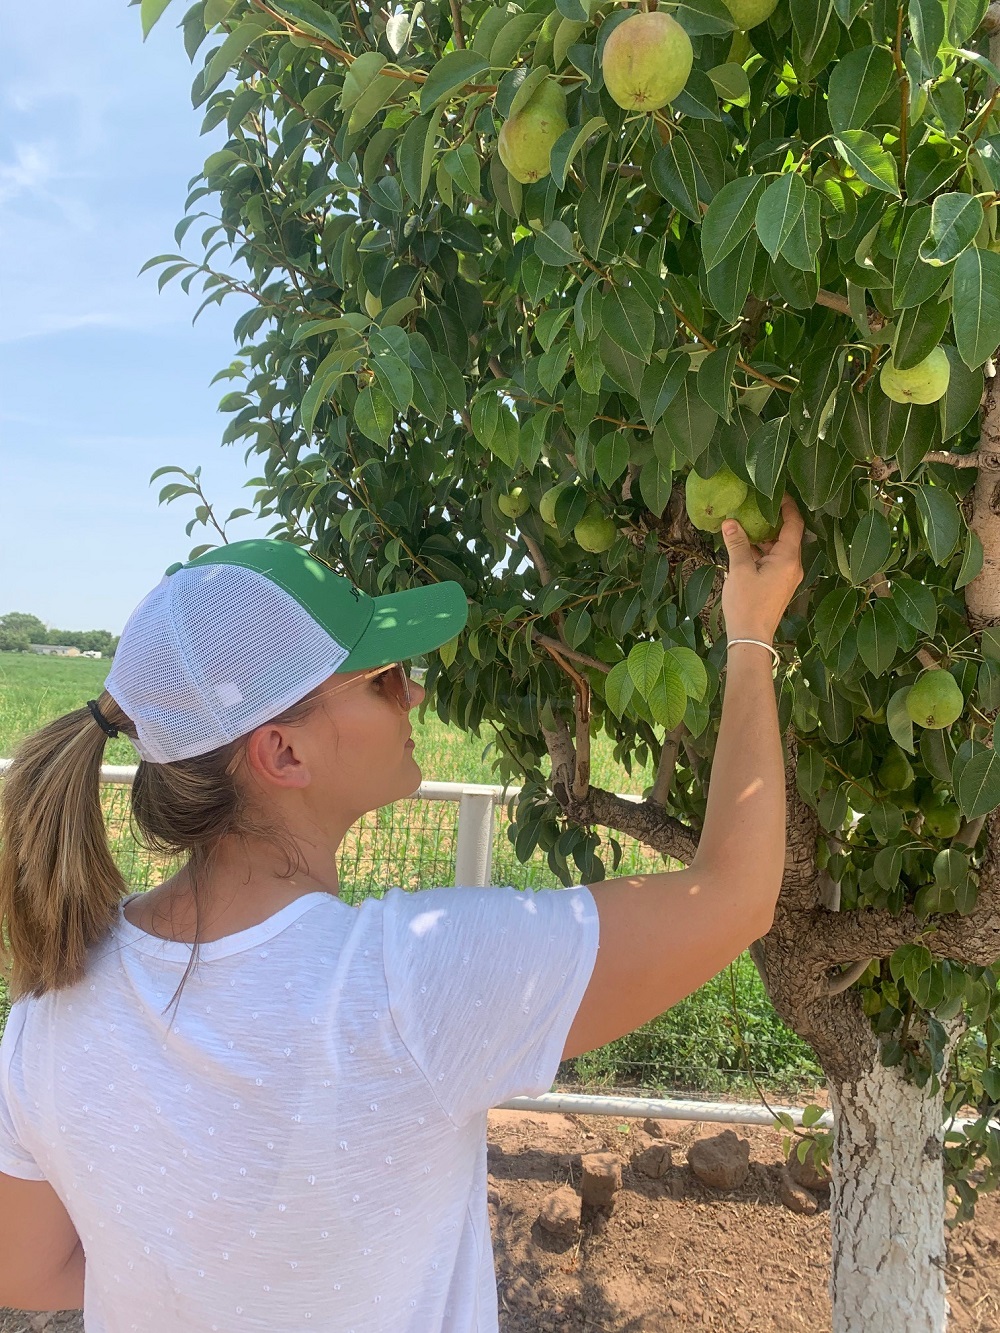 A young woman in a white shirt with a pony tail and baseball cap picks a pear from a tree.